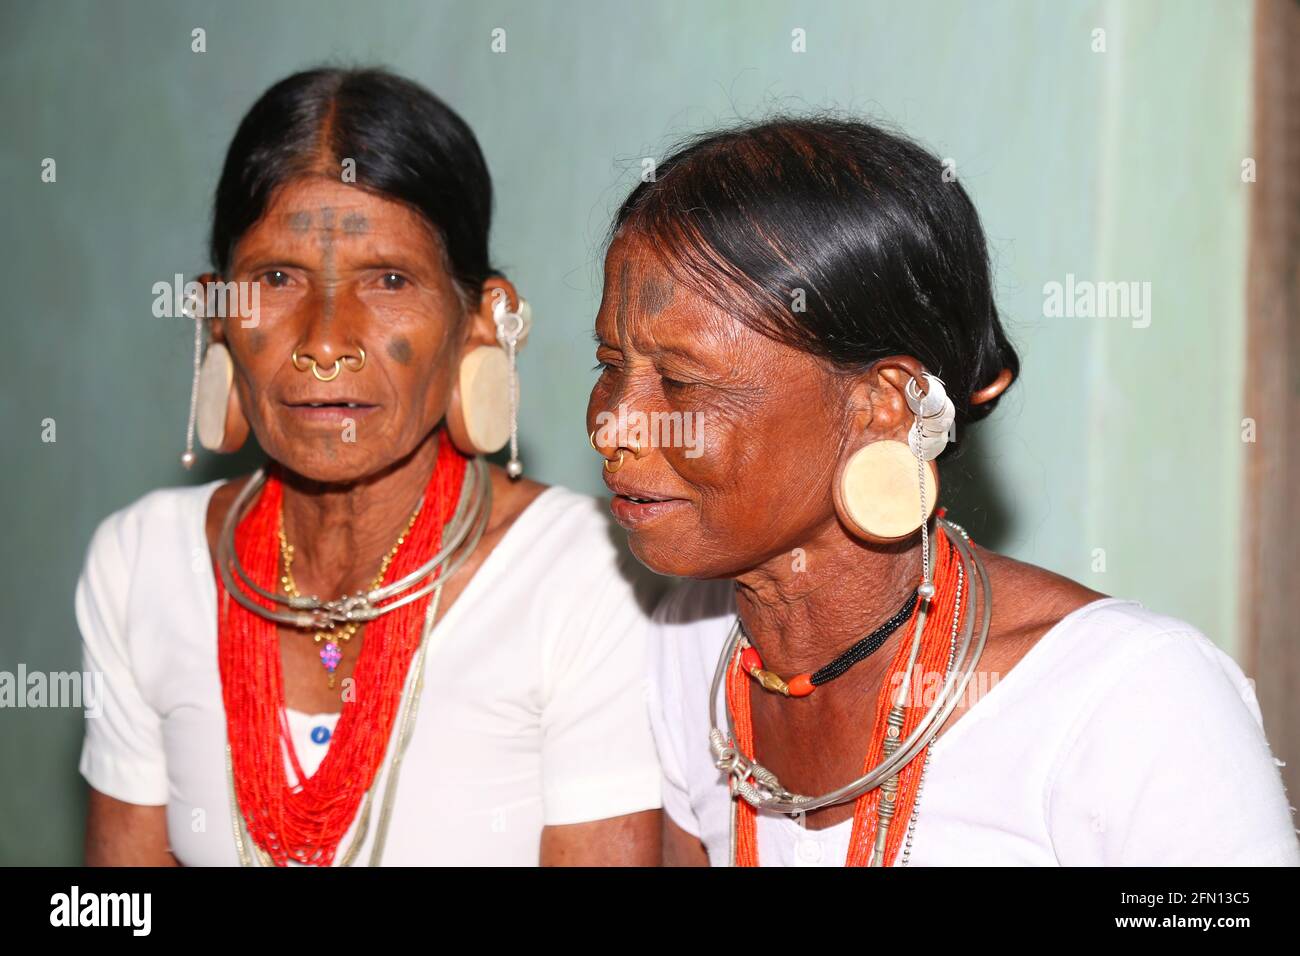 Tribal women with round wooden plugs in huge ear lobes. Characteristic tattoo mark down the middle of the forehead. LANJIA SAORA TRIBE. Puttasingh Vil Stock Photo